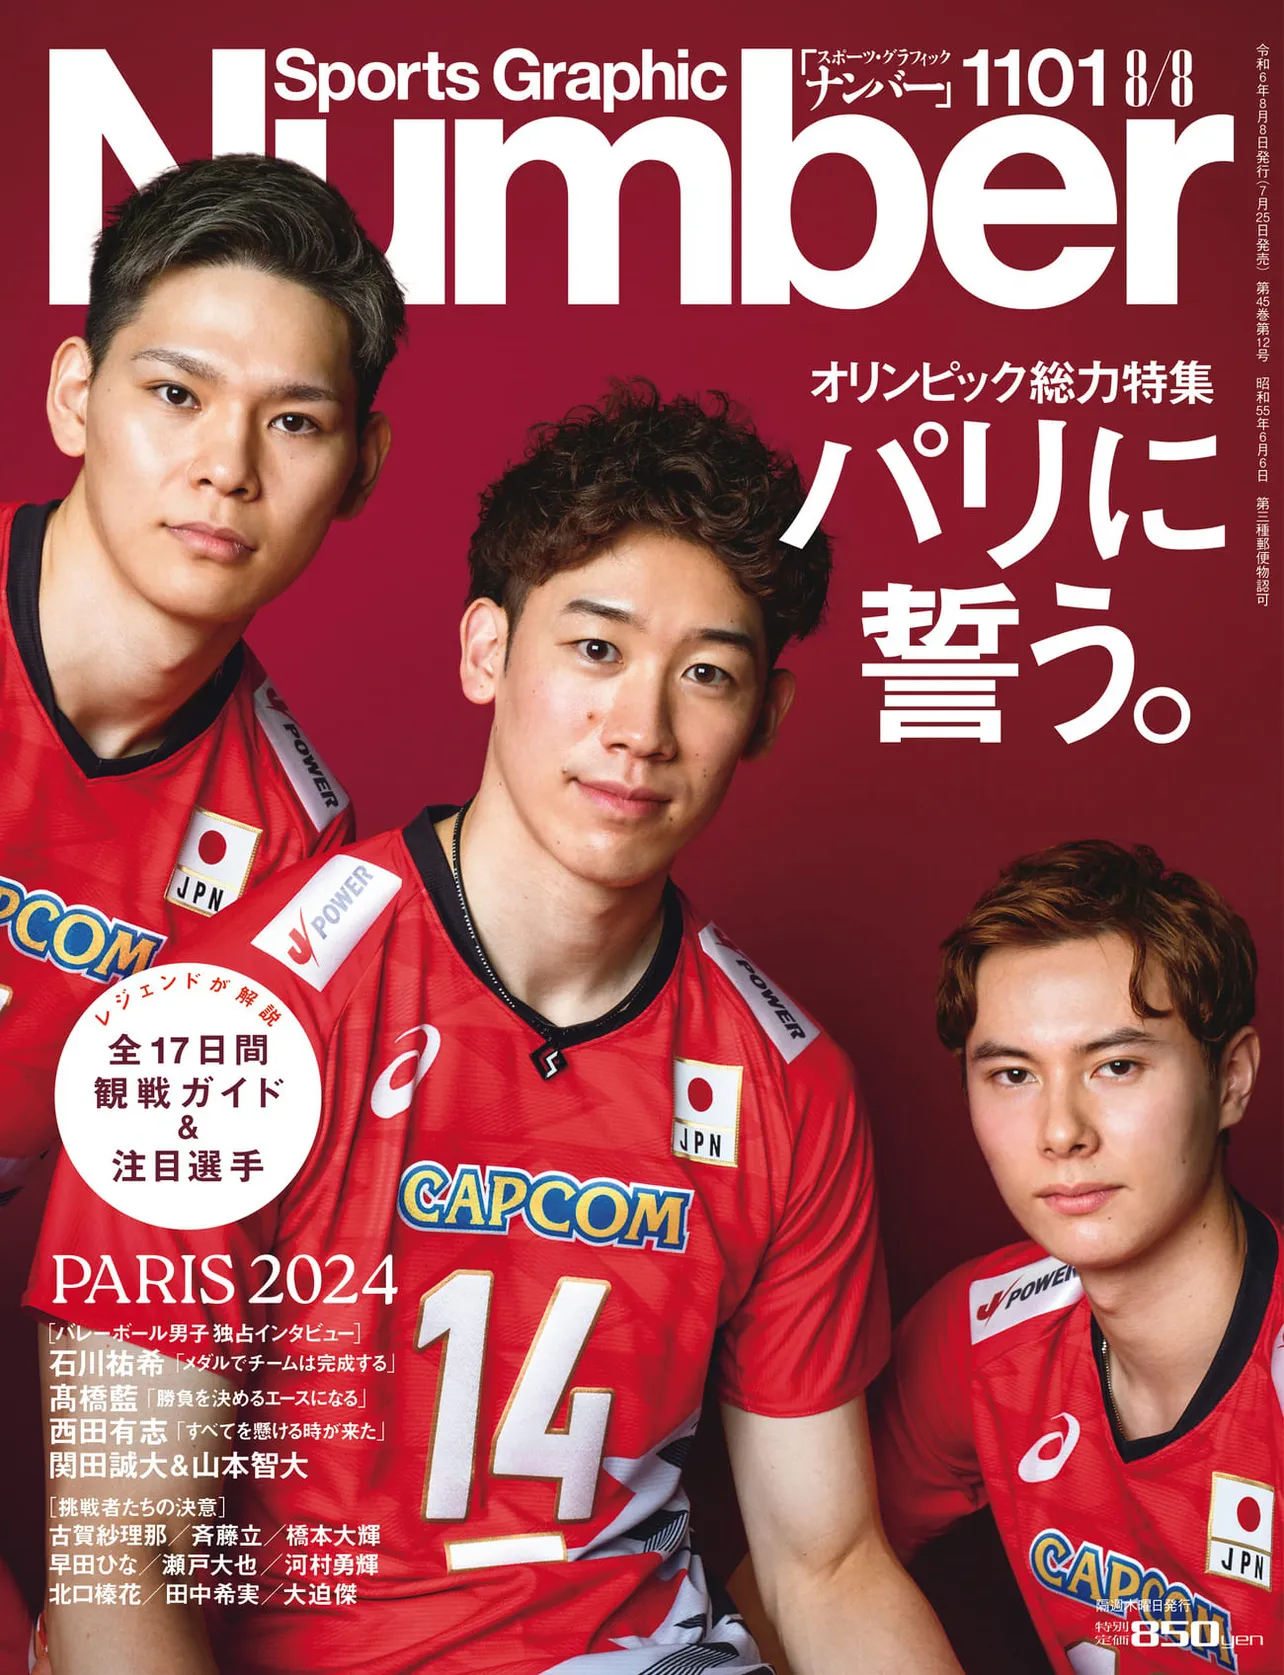 「Sports Graphic Number」7月25日発売　1101号